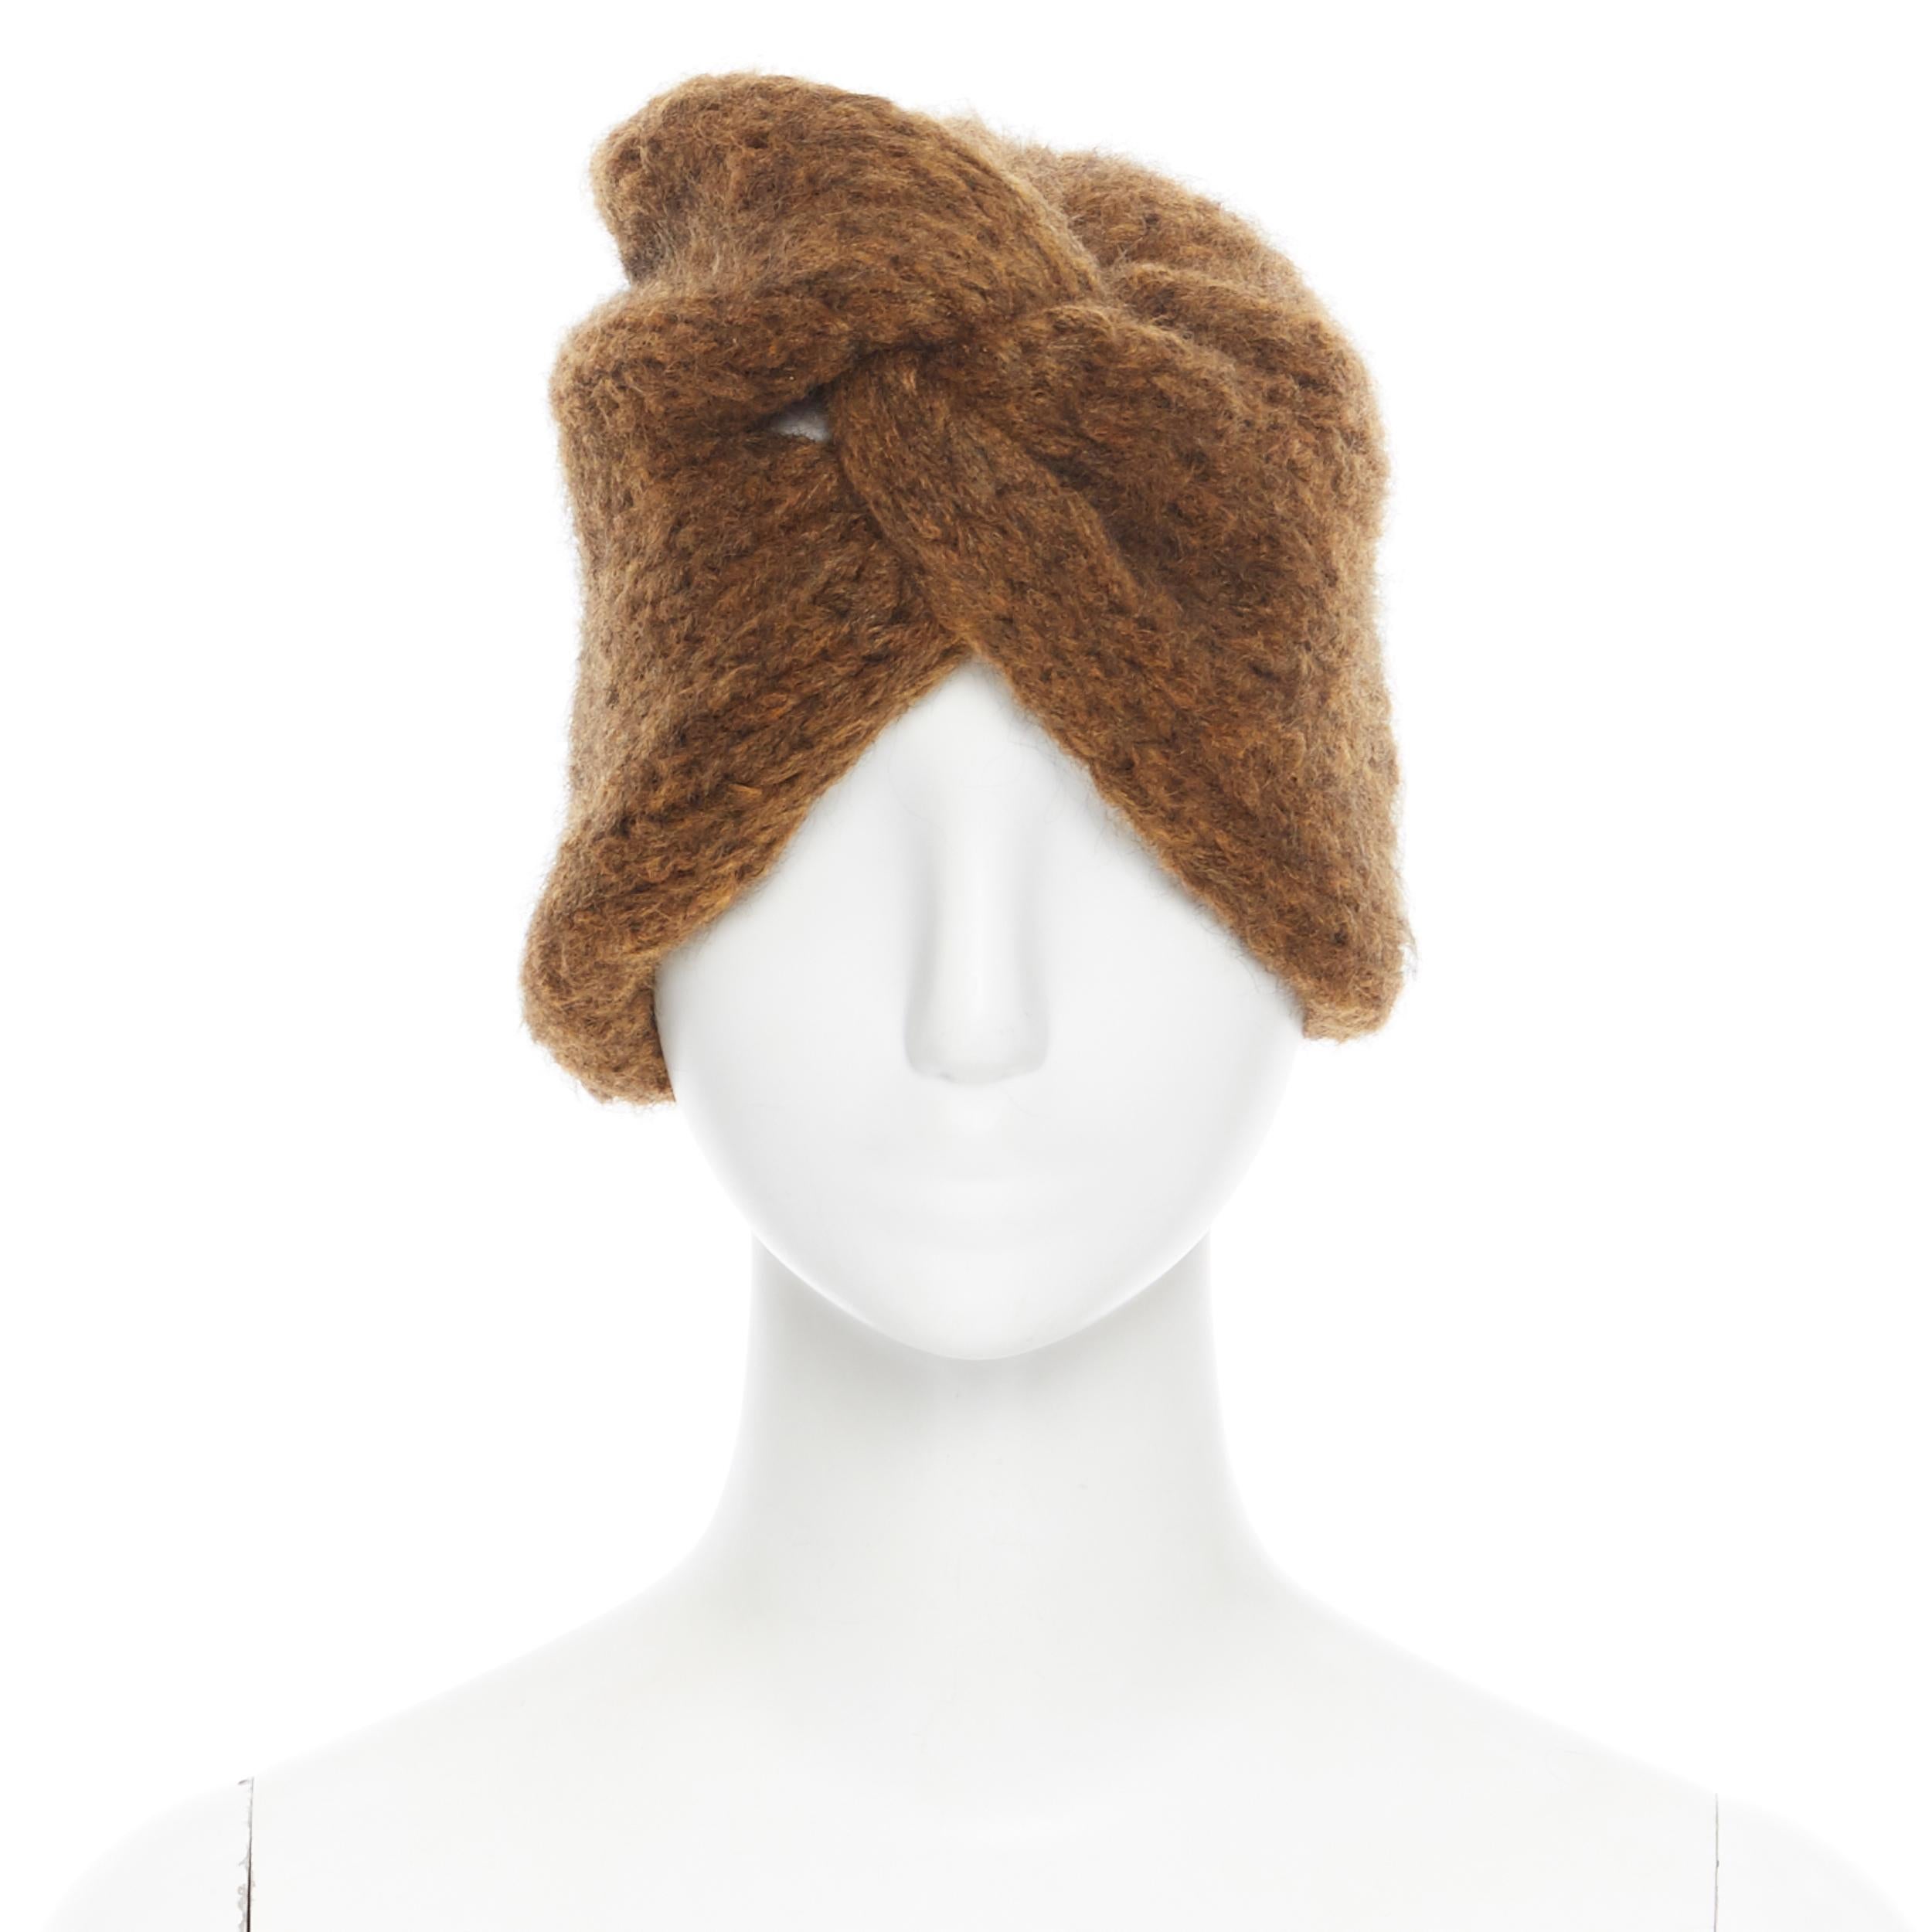 MES DEMOISELLES mohair blend brown chunky knit knot turban beanie hat 
Reference: JETI/A00175 
Brand: Mes Demoiselles 
Material: Acrylic 
Color: Brown 
Pattern: Solid 
Made in: China 

CONDITION: 
Condition: Excellent, this item was pre-owned and is